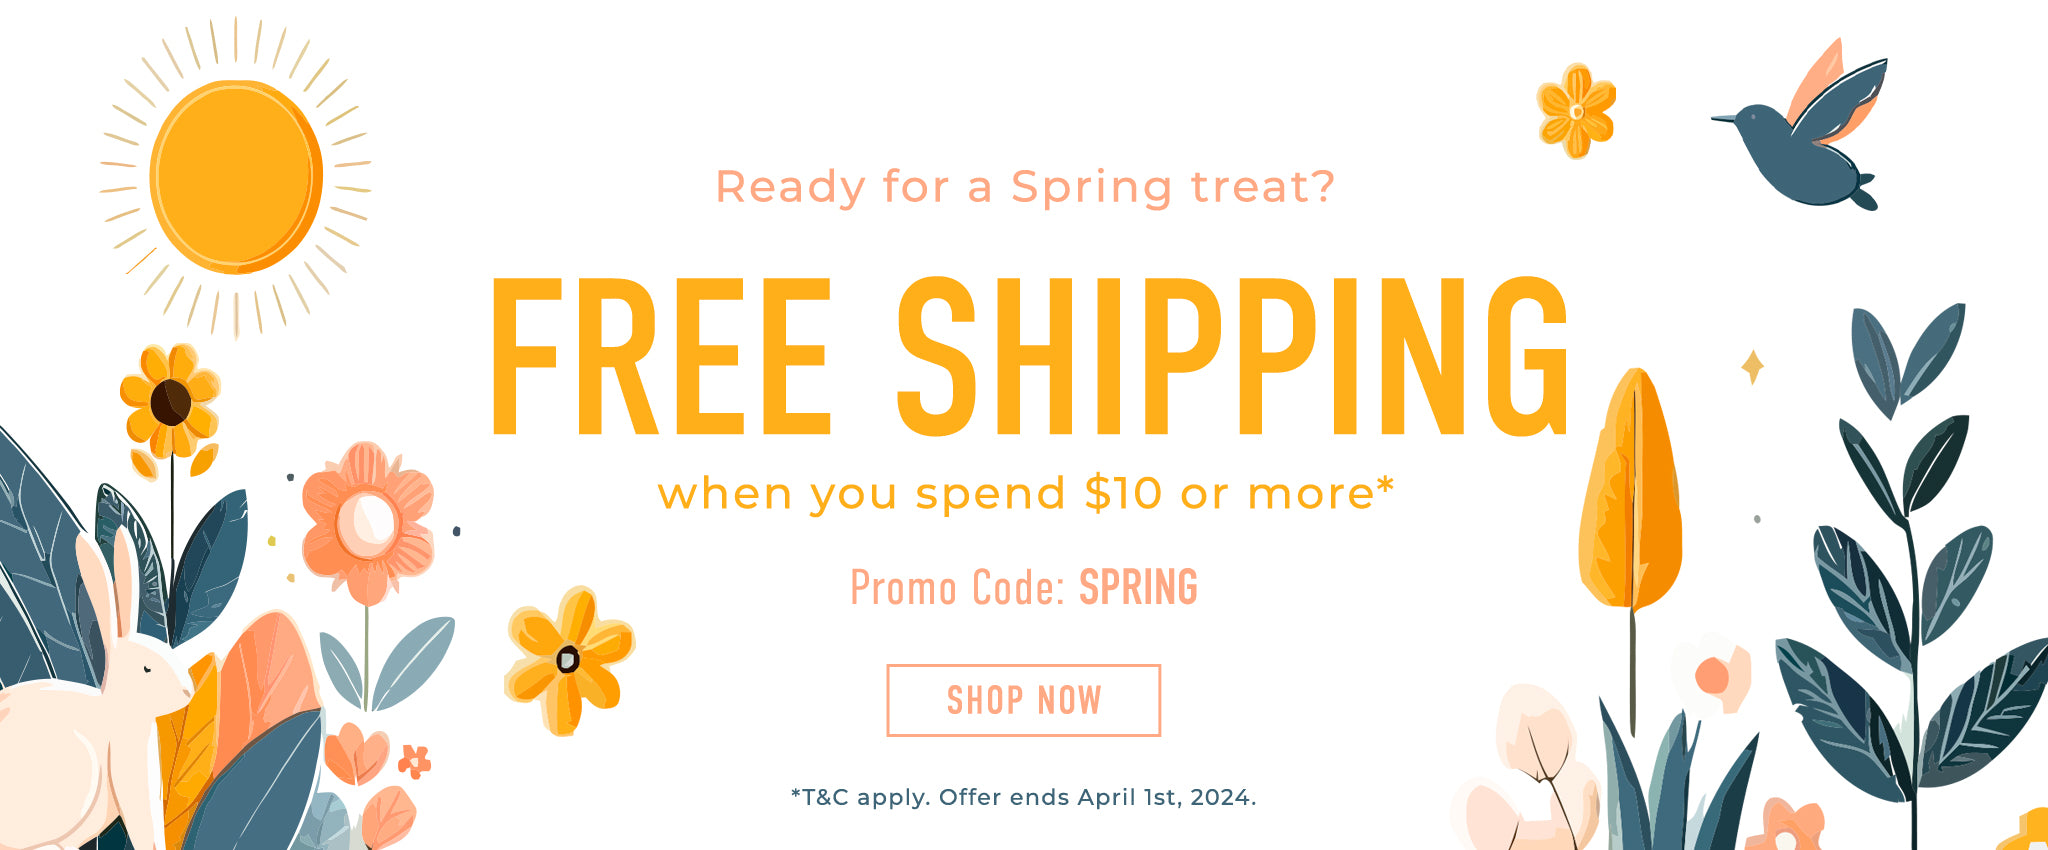 Free standard shipping on all orders when you spend $10 or more. Use code: SPRING